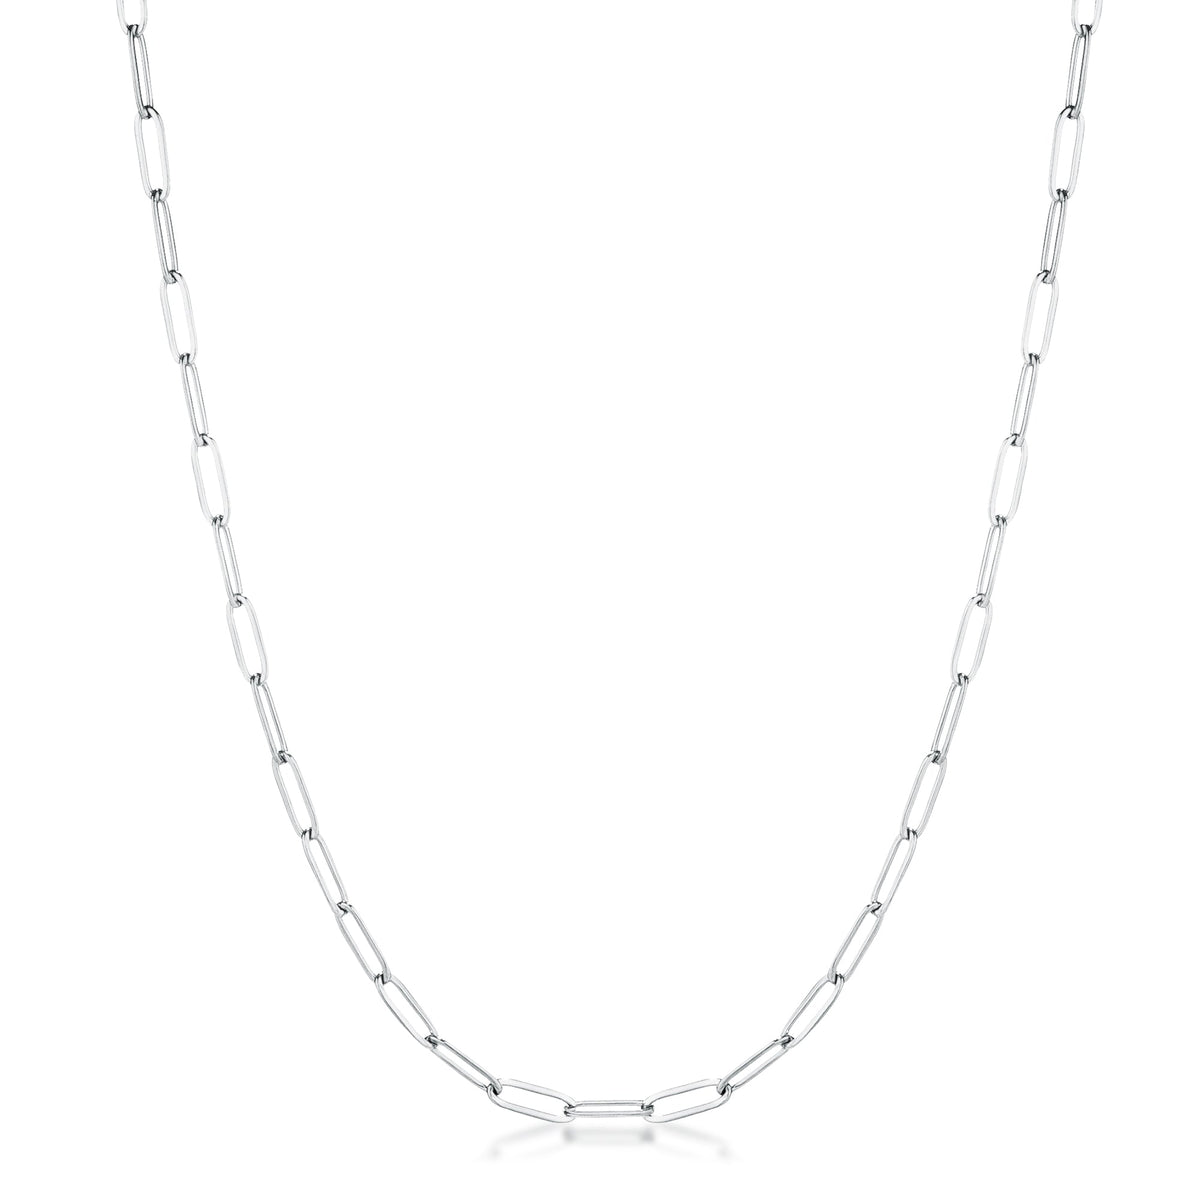 16 Rhodium Plated Linked Petite Paperclip Chain Necklace